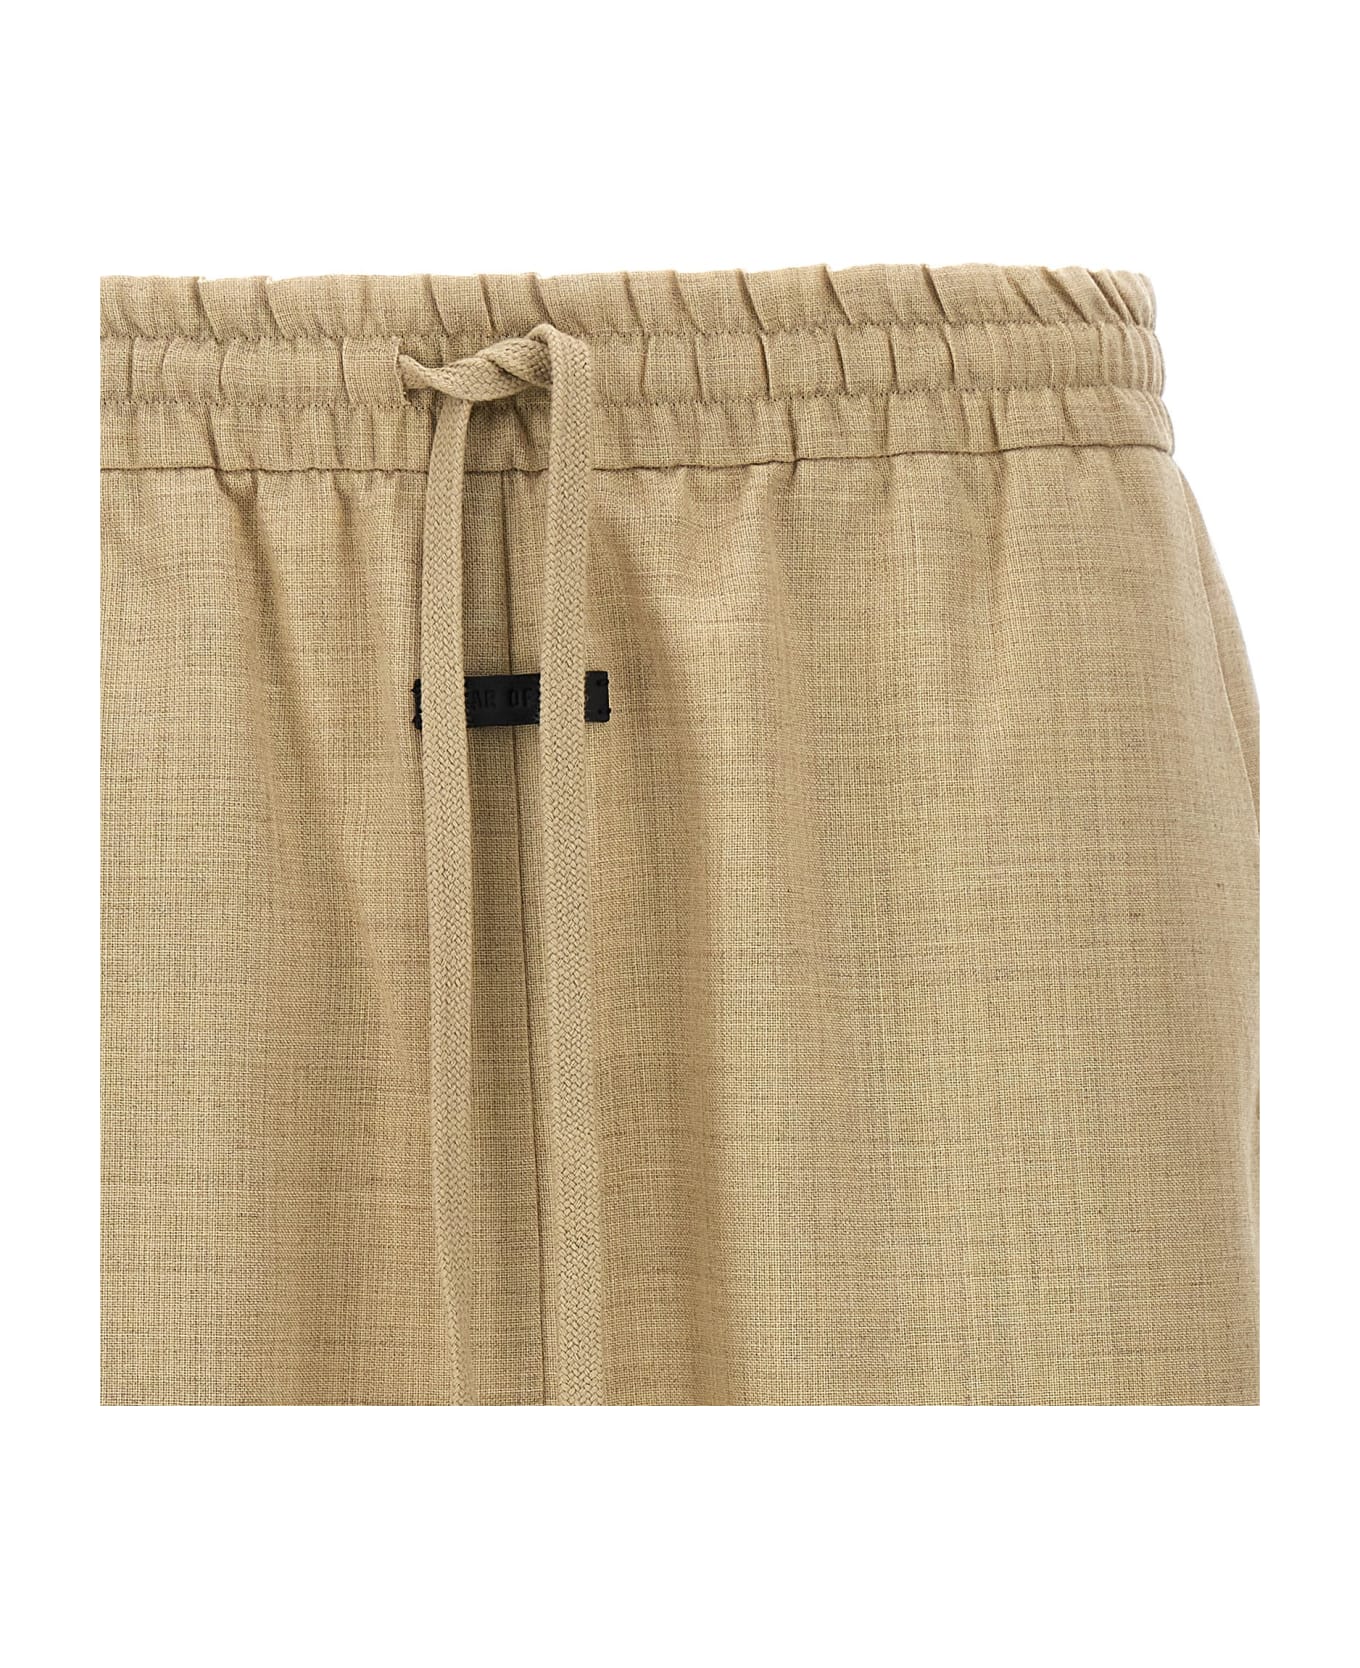 Fear of God 'relaxed' Shorts - Beige ショートパンツ